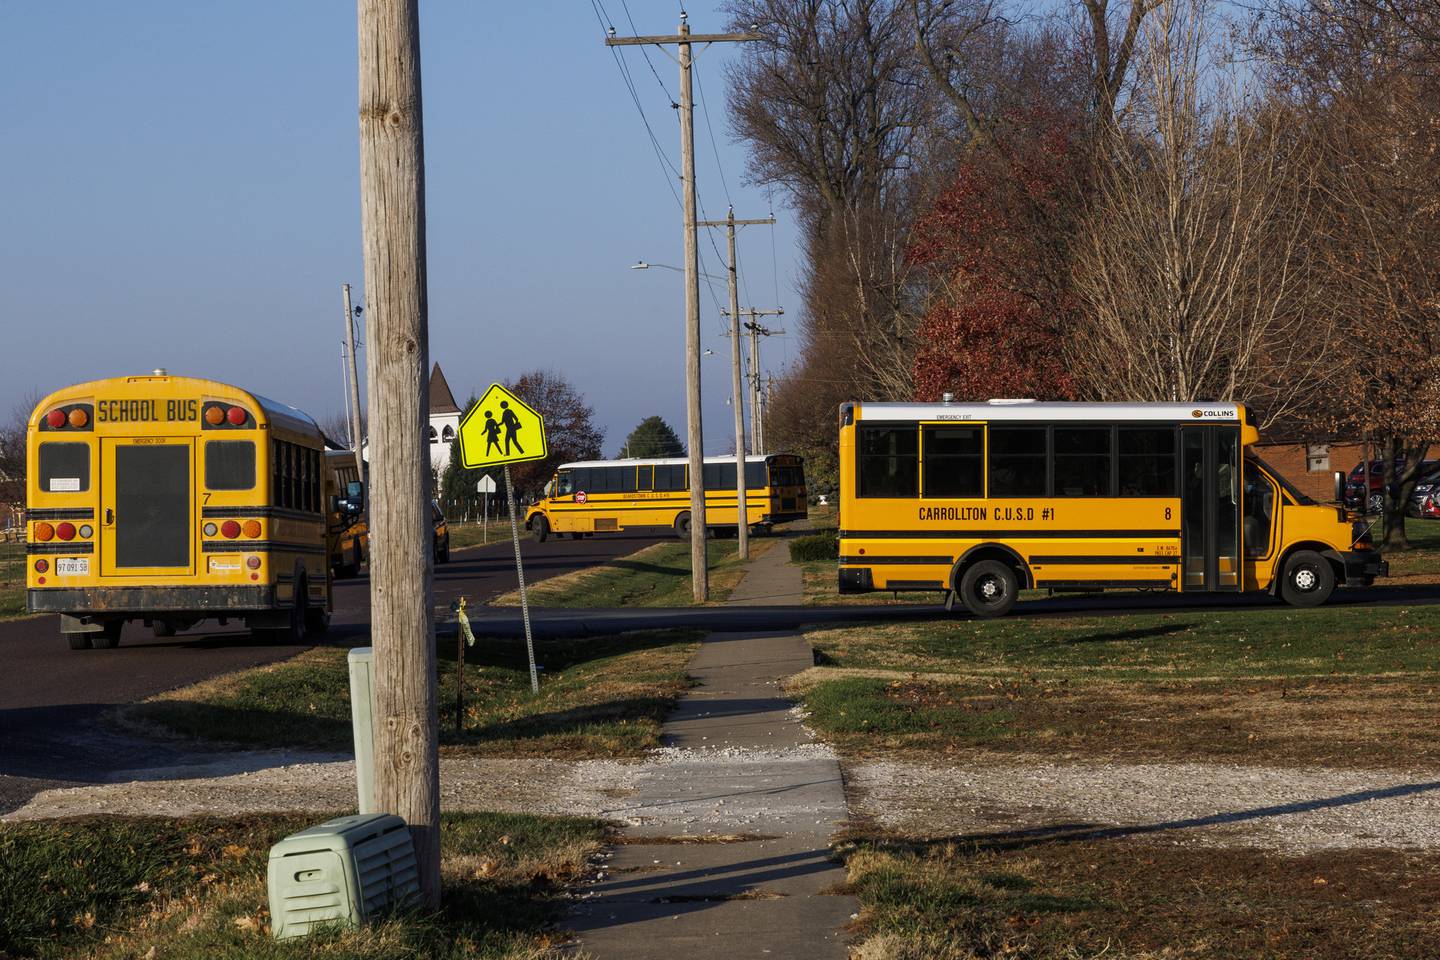 Buses from school districts throughout an eight-county region of rural Illinois bring students to the Garrison School on a morning in November. 